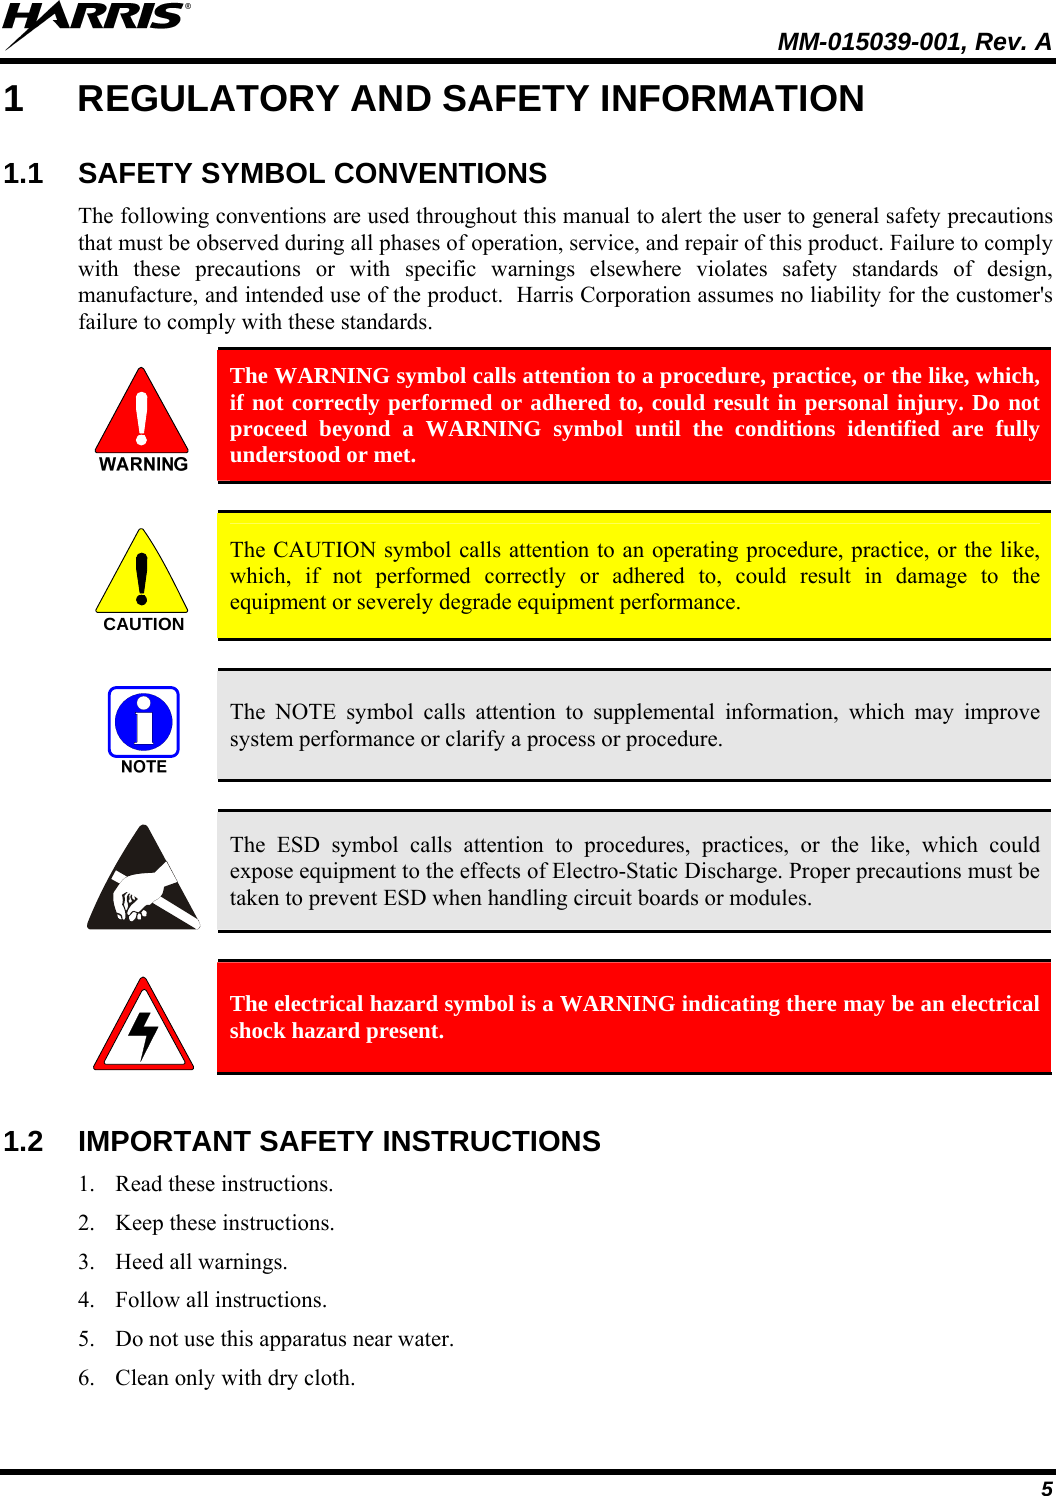   MM-015039-001, Rev. A 5 1  REGULATORY AND SAFETY INFORMATION 1.1 SAFETY SYMBOL CONVENTIONS The following conventions are used throughout this manual to alert the user to general safety precautions that must be observed during all phases of operation, service, and repair of this product. Failure to comply with these precautions or with specific warnings elsewhere violates safety standards of design, manufacture, and intended use of the product.  Harris Corporation assumes no liability for the customer&apos;s failure to comply with these standards.  The WARNING symbol calls attention to a procedure, practice, or the like, which, if not correctly performed or adhered to, could result in personal injury. Do not proceed beyond a WARNING symbol until the conditions identified are fully understood or met.   CAUTION  The CAUTION symbol calls attention to an operating procedure, practice, or the like, which, if not performed correctly or adhered to, could result in damage to the equipment or severely degrade equipment performance.    The NOTE symbol calls attention to supplemental information, which may improve system performance or clarify a process or procedure.    The ESD symbol calls attention to procedures, practices, or the like, which could expose equipment to the effects of Electro-Static Discharge. Proper precautions must be taken to prevent ESD when handling circuit boards or modules.    The electrical hazard symbol is a WARNING indicating there may be an electrical shock hazard present.  1.2 IMPORTANT SAFETY INSTRUCTIONS 1. Read these instructions. 2. Keep these instructions. 3. Heed all warnings. 4. Follow all instructions. 5. Do not use this apparatus near water. 6. Clean only with dry cloth. 